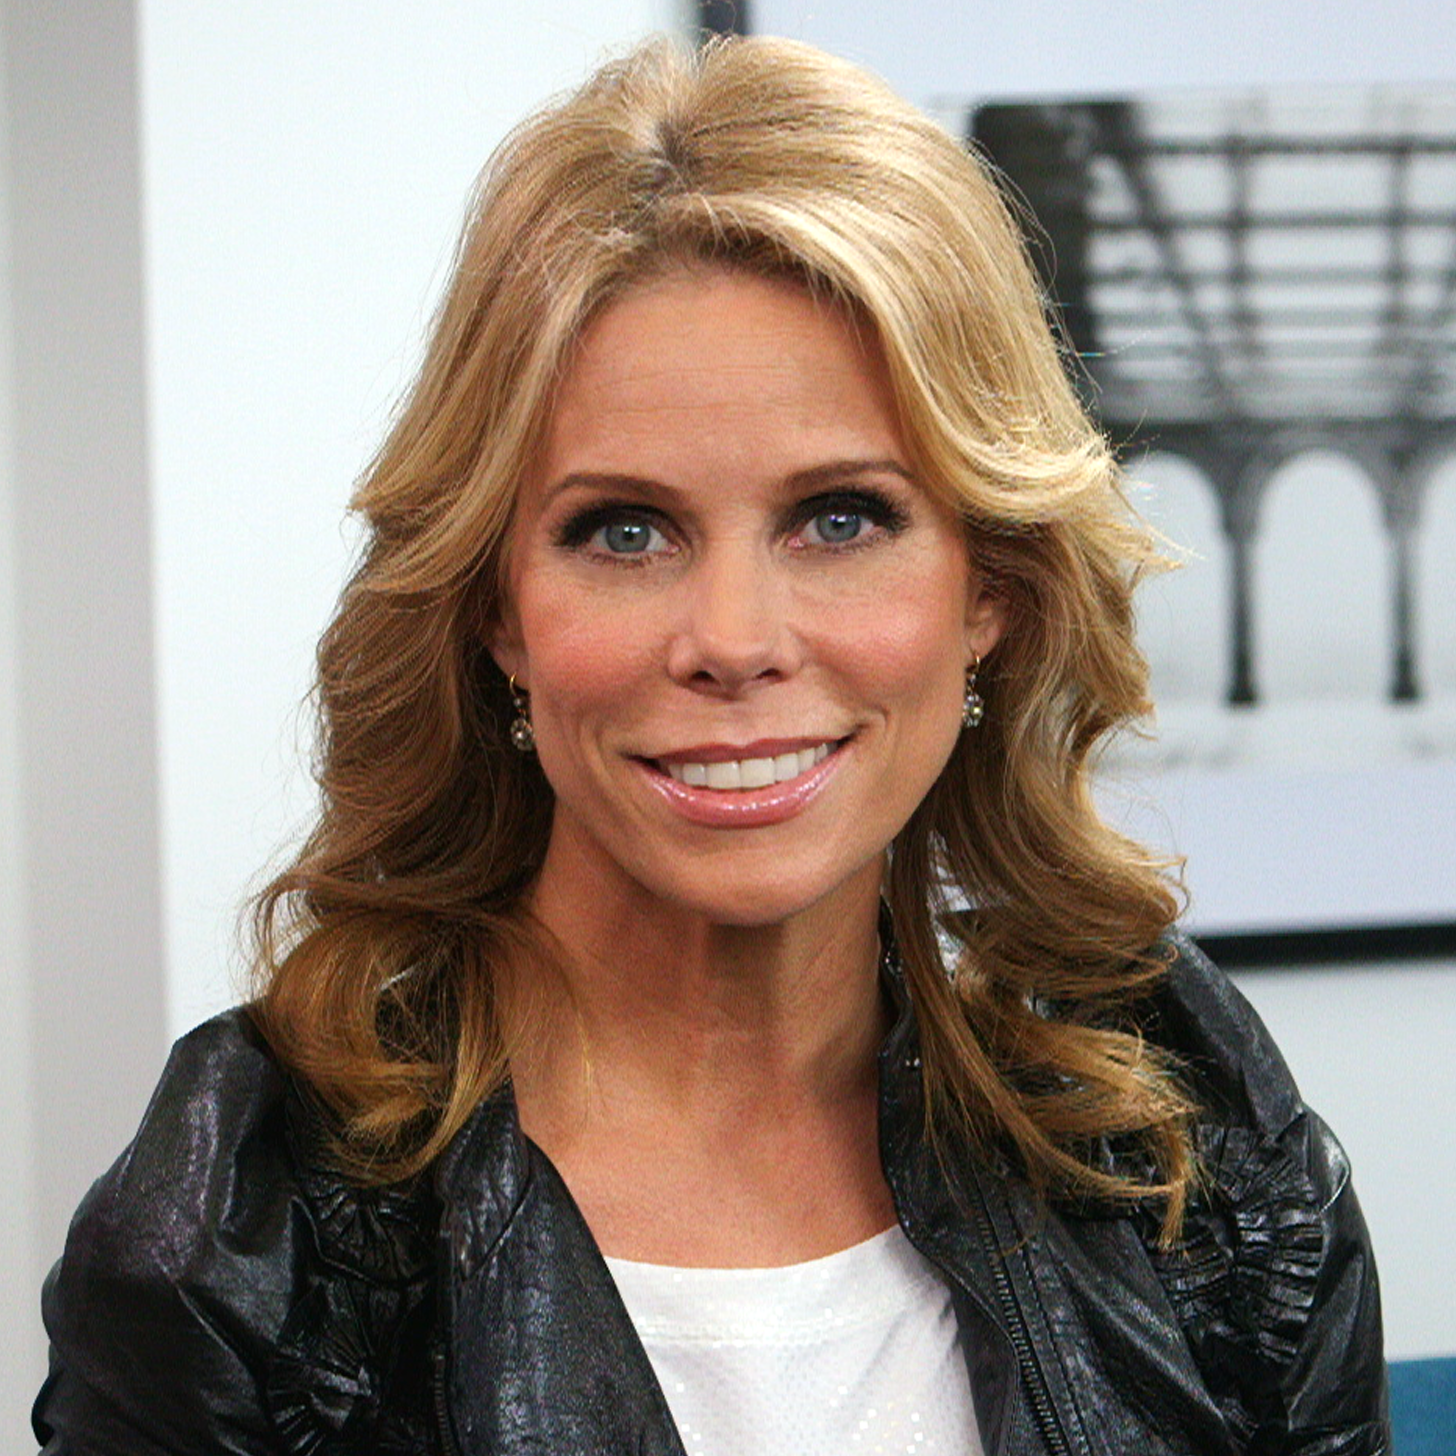 More Pictures Of Cheryl Hines. cheryl hines family. 